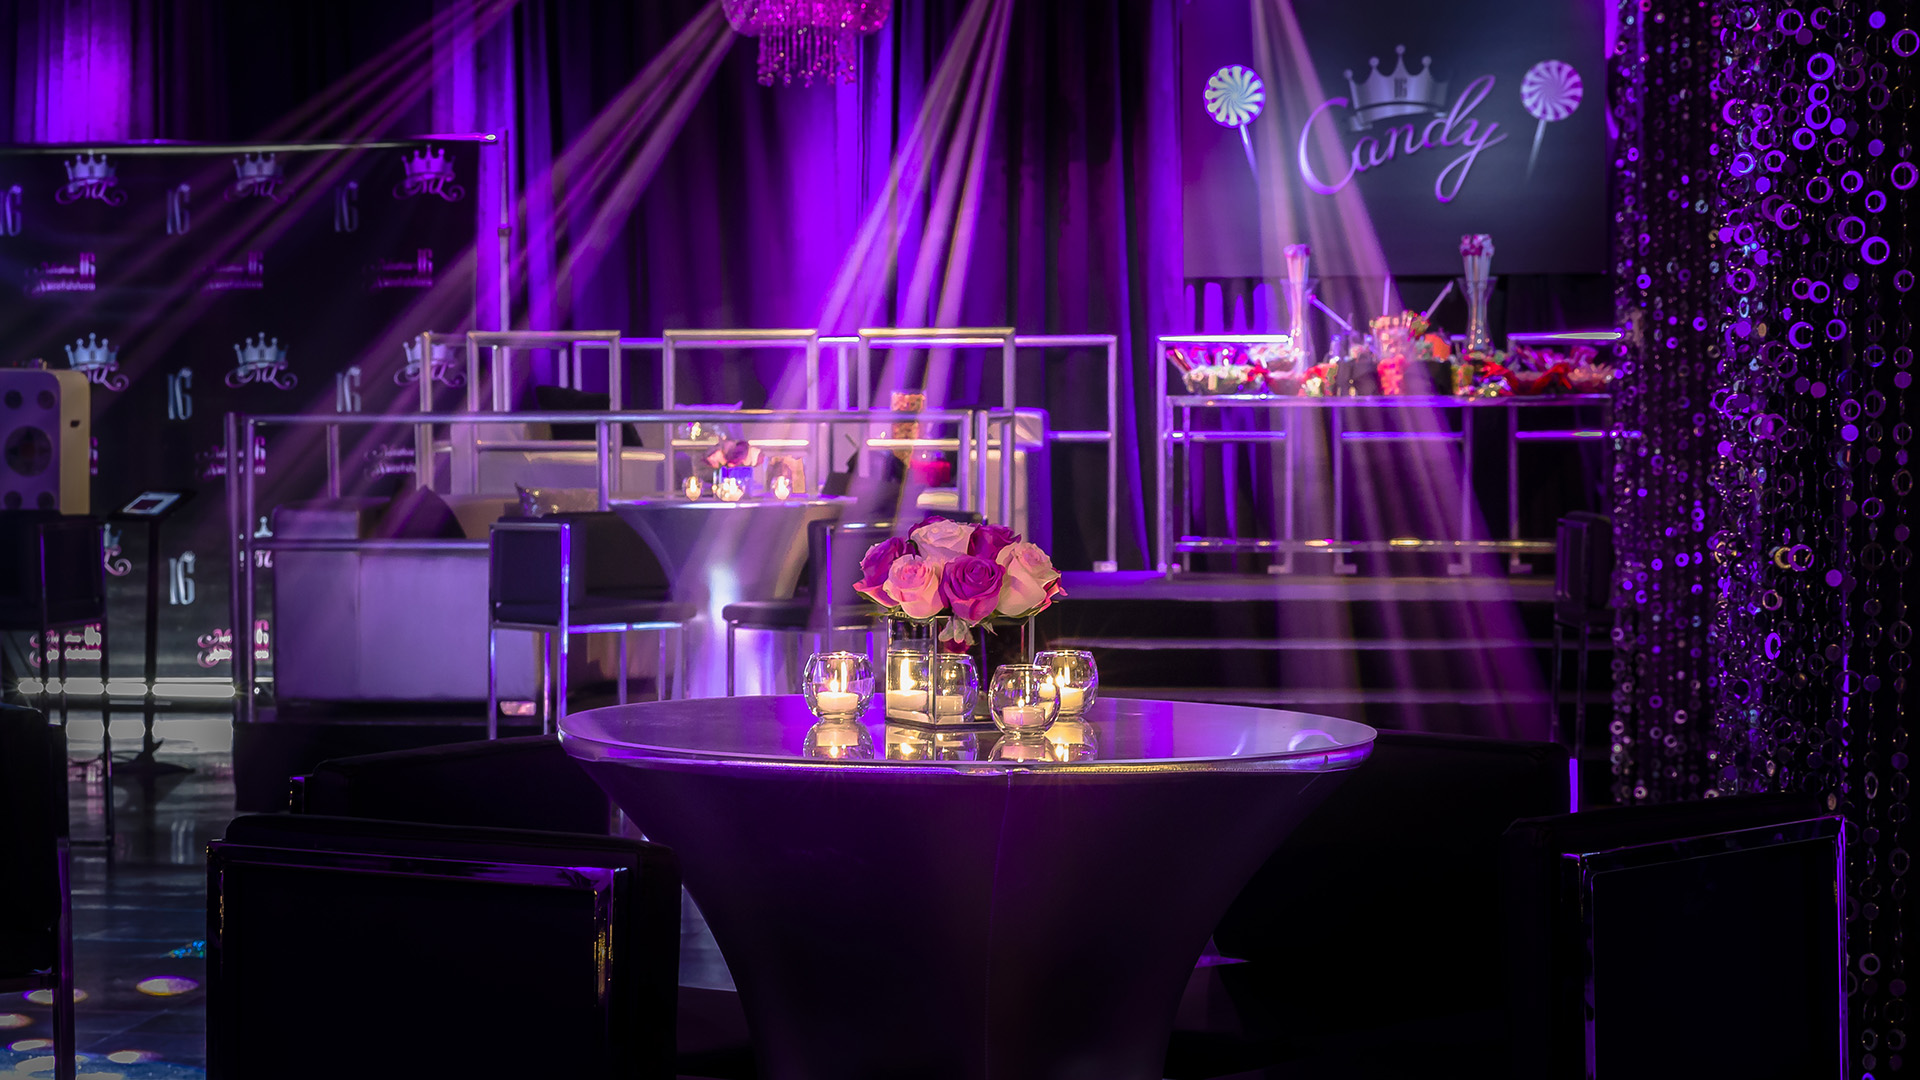 Montreal Wedding, Mitzvah Specialists | Montreal's Wedding & event producers - live performers, DJ's for weddings, MC's, dancers, wedding / event rentals, lighting for your Wedding & special moments.